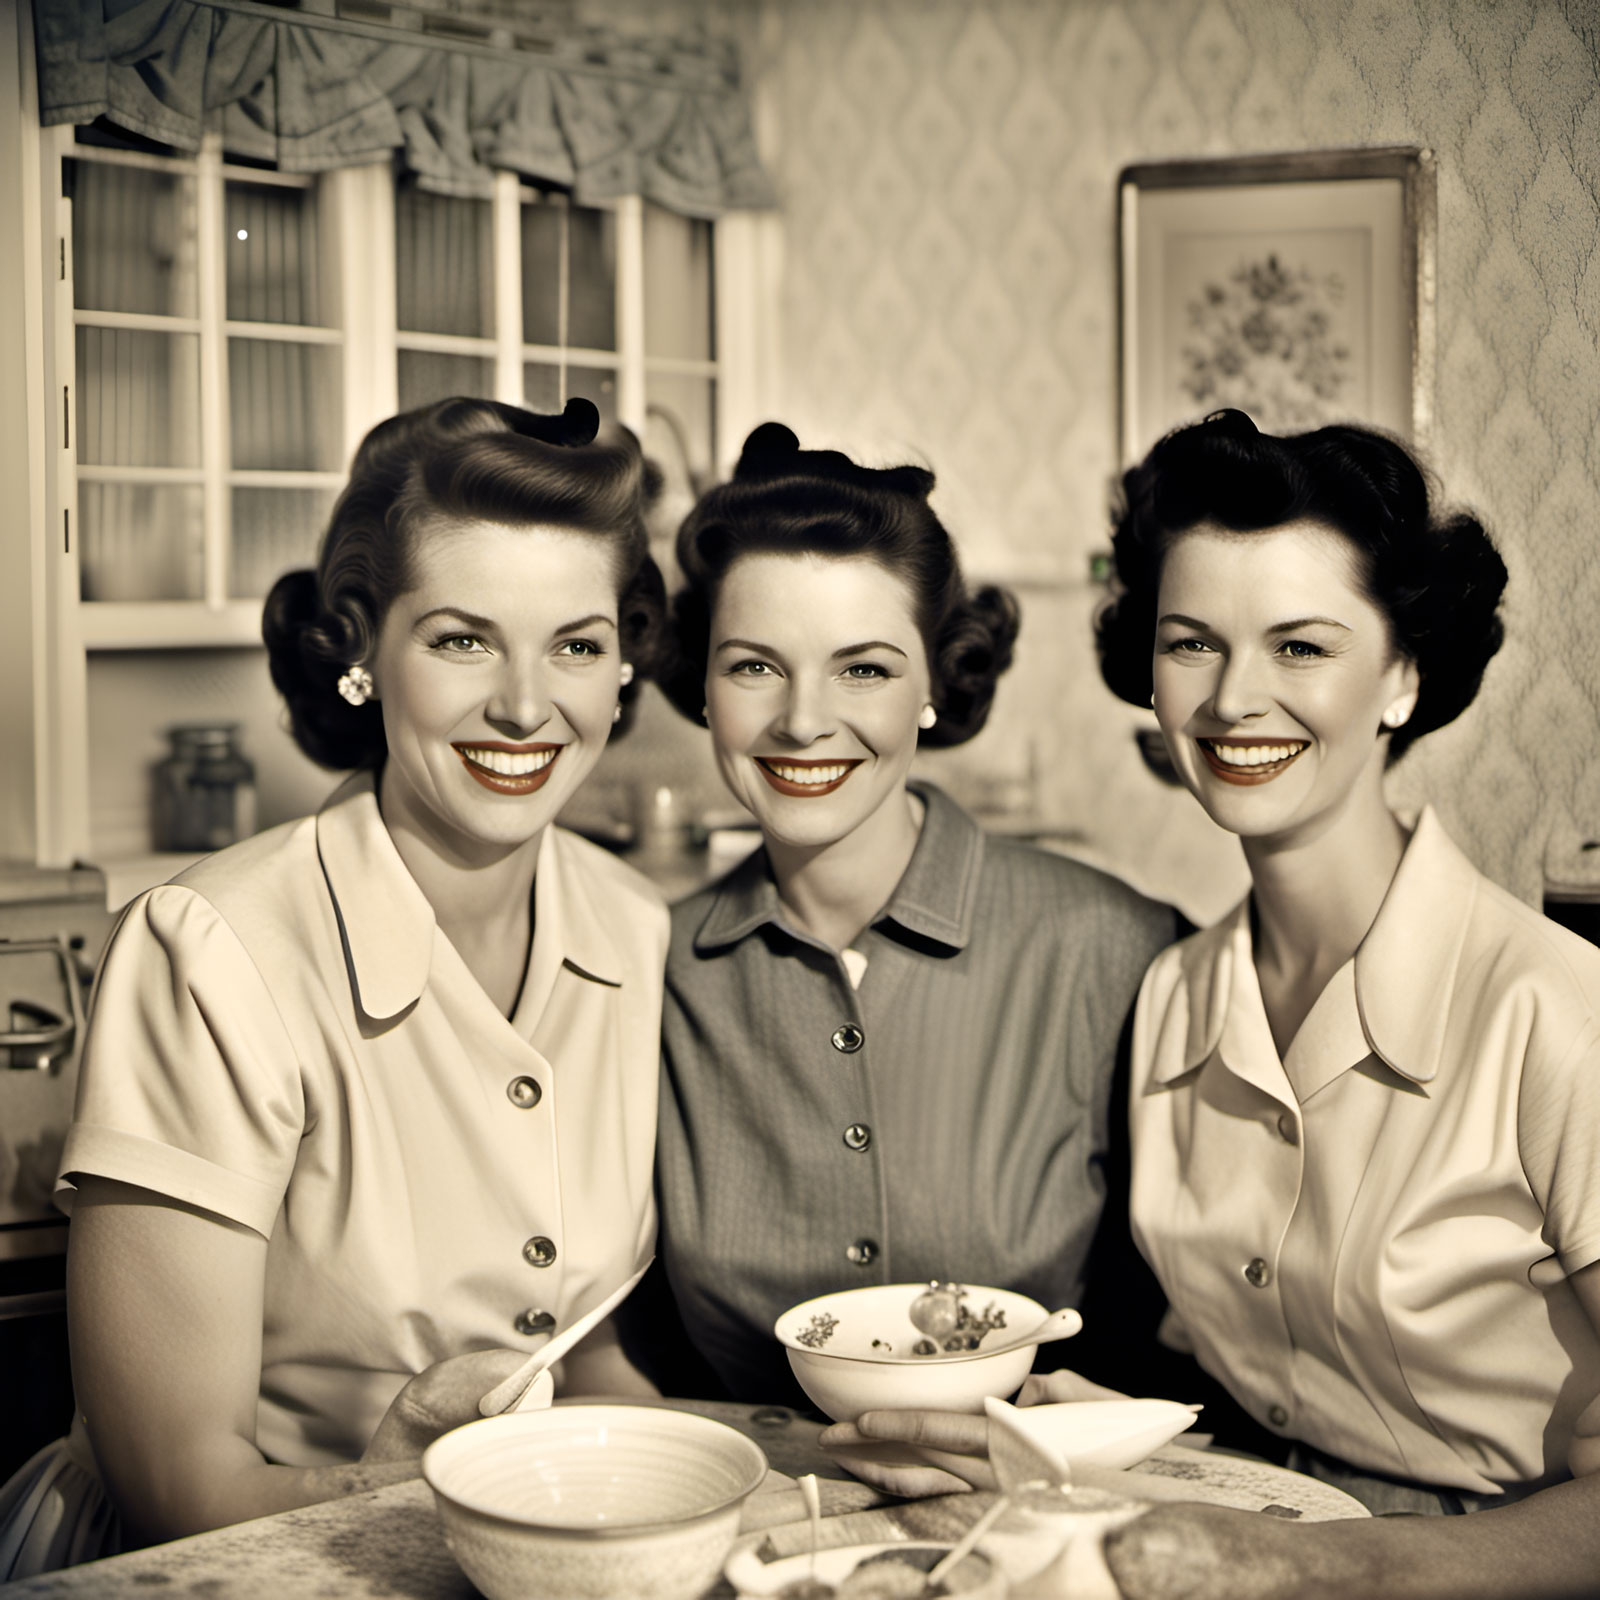 web_145703_A-photograph-of-happy-housewives-in-the-1950s._esrgan-v1-x2plus